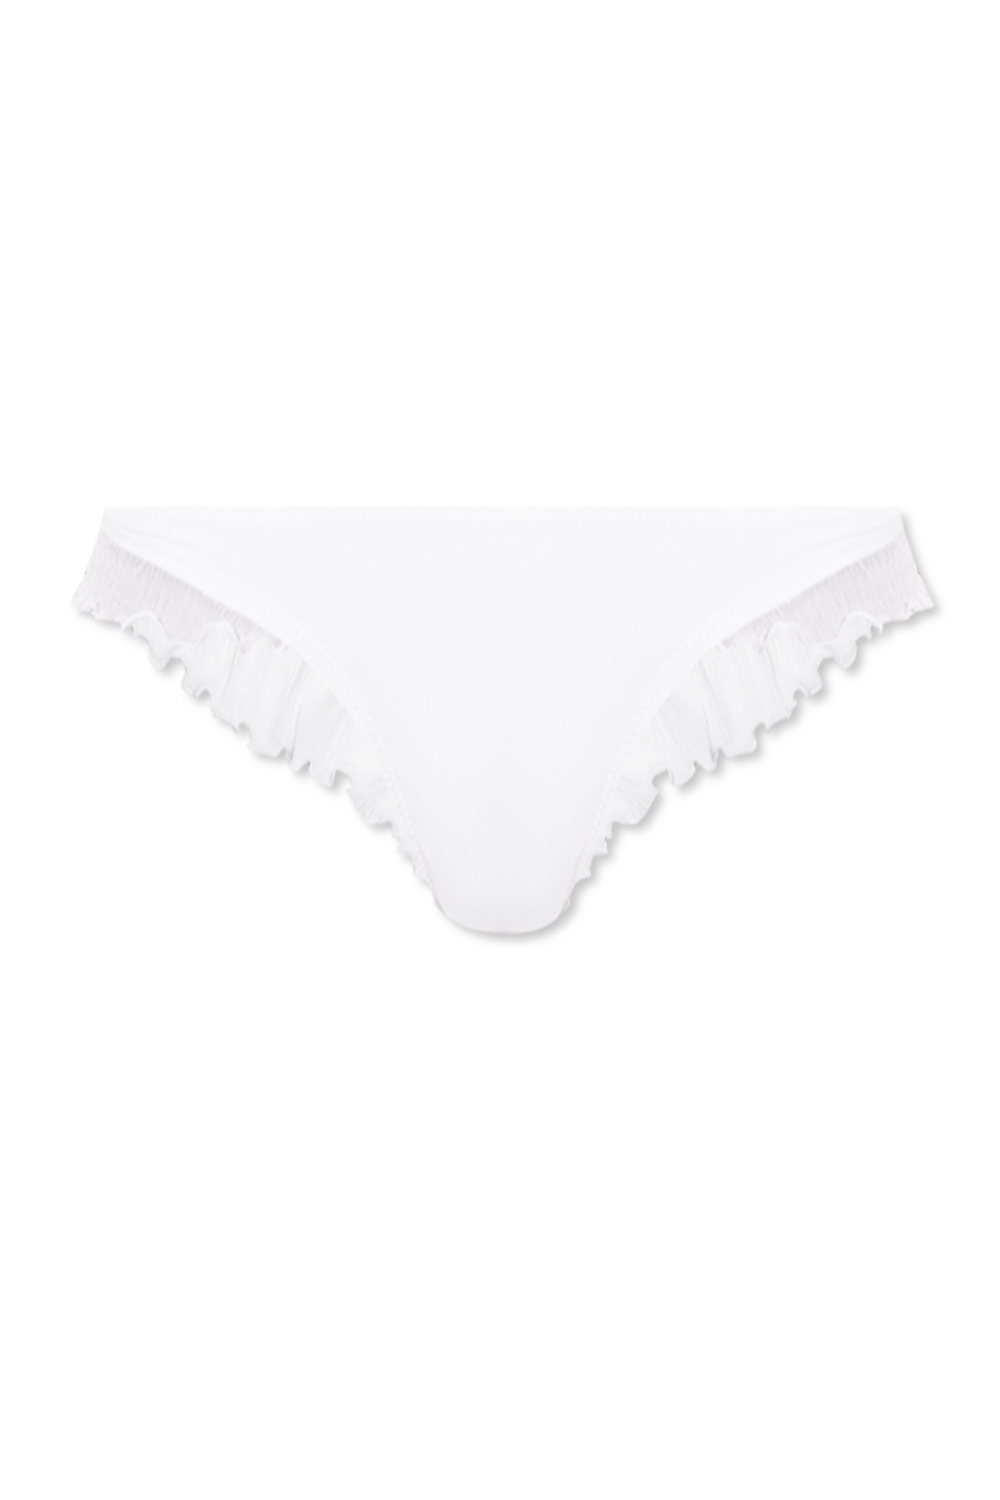 STYLISH MODELS FOR THE MOST DEMANDING WEDDING GUESTS ‘Alala’ swimsuit bottom